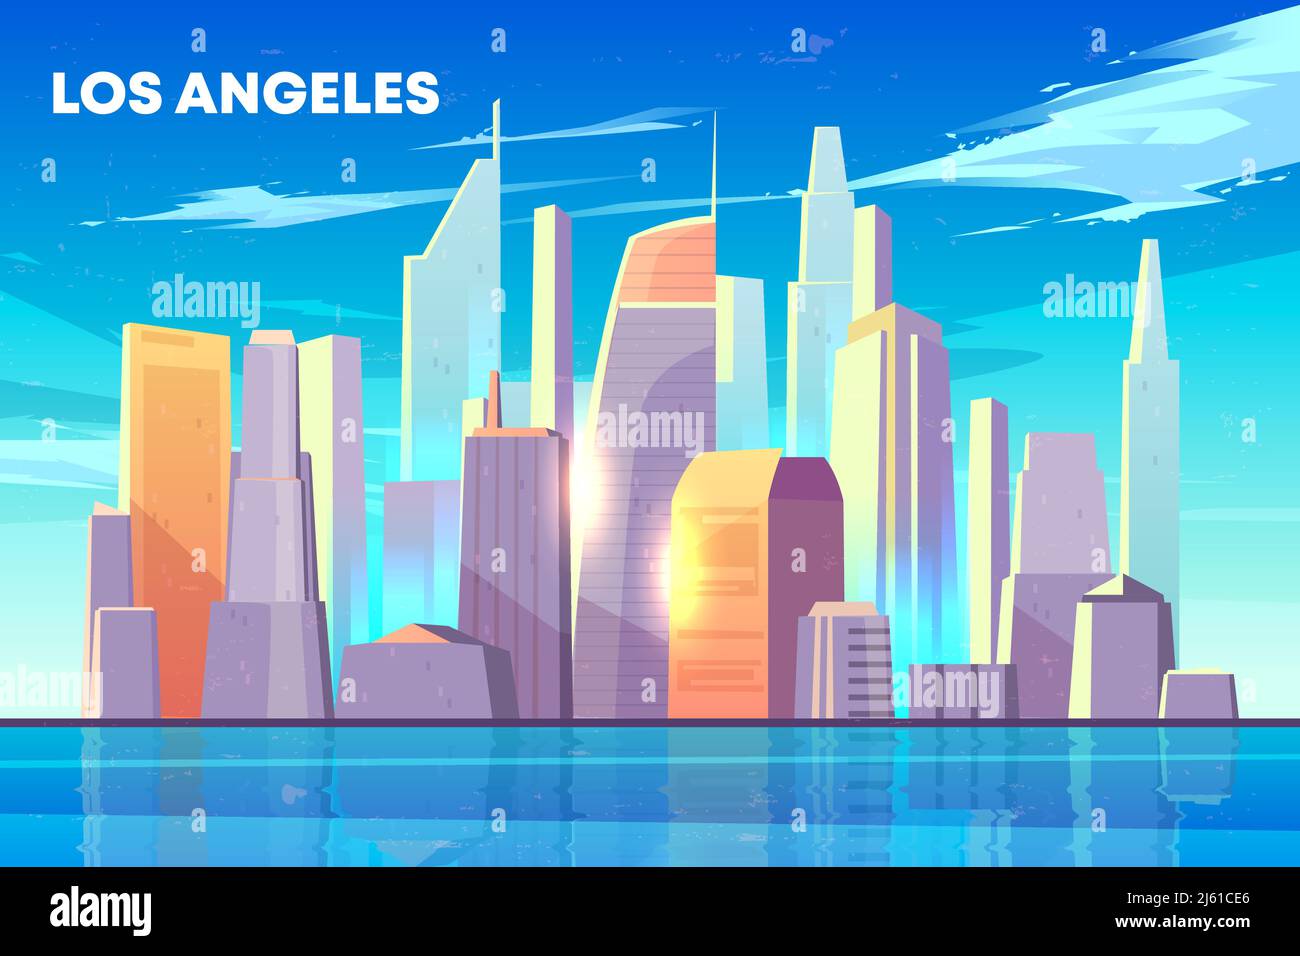 Los Angeles city skyline with illuminated by sun skyscrapers buildings on seashore, houses reflections in bay water cartoon vector background. Modern Stock Vector